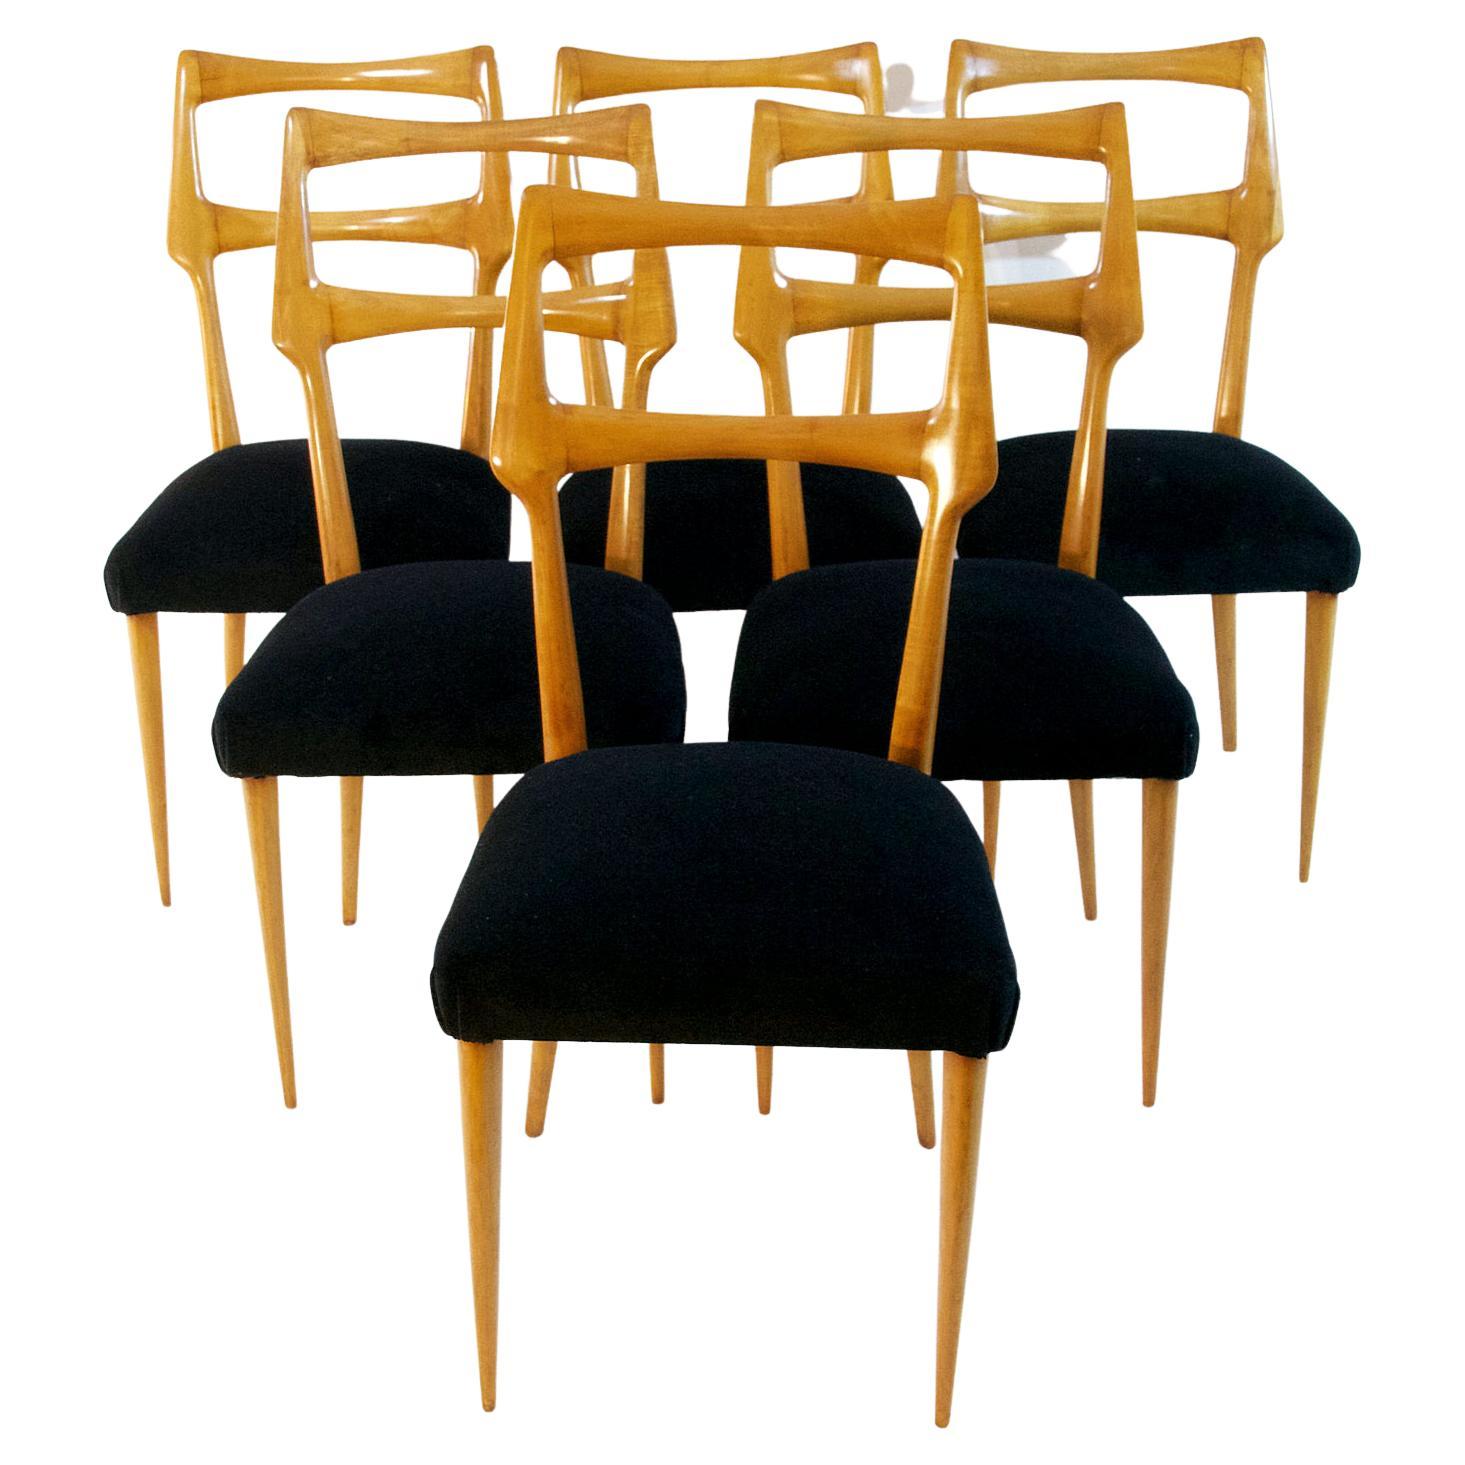 A set of six Italian dining chairs with a sublime organic design in maple attributed to Augusto Romano and re-upholstered in black velvet. The chairs have supreme craftsmanship and are in great condition. Very comfortable for long dinner parties.
  